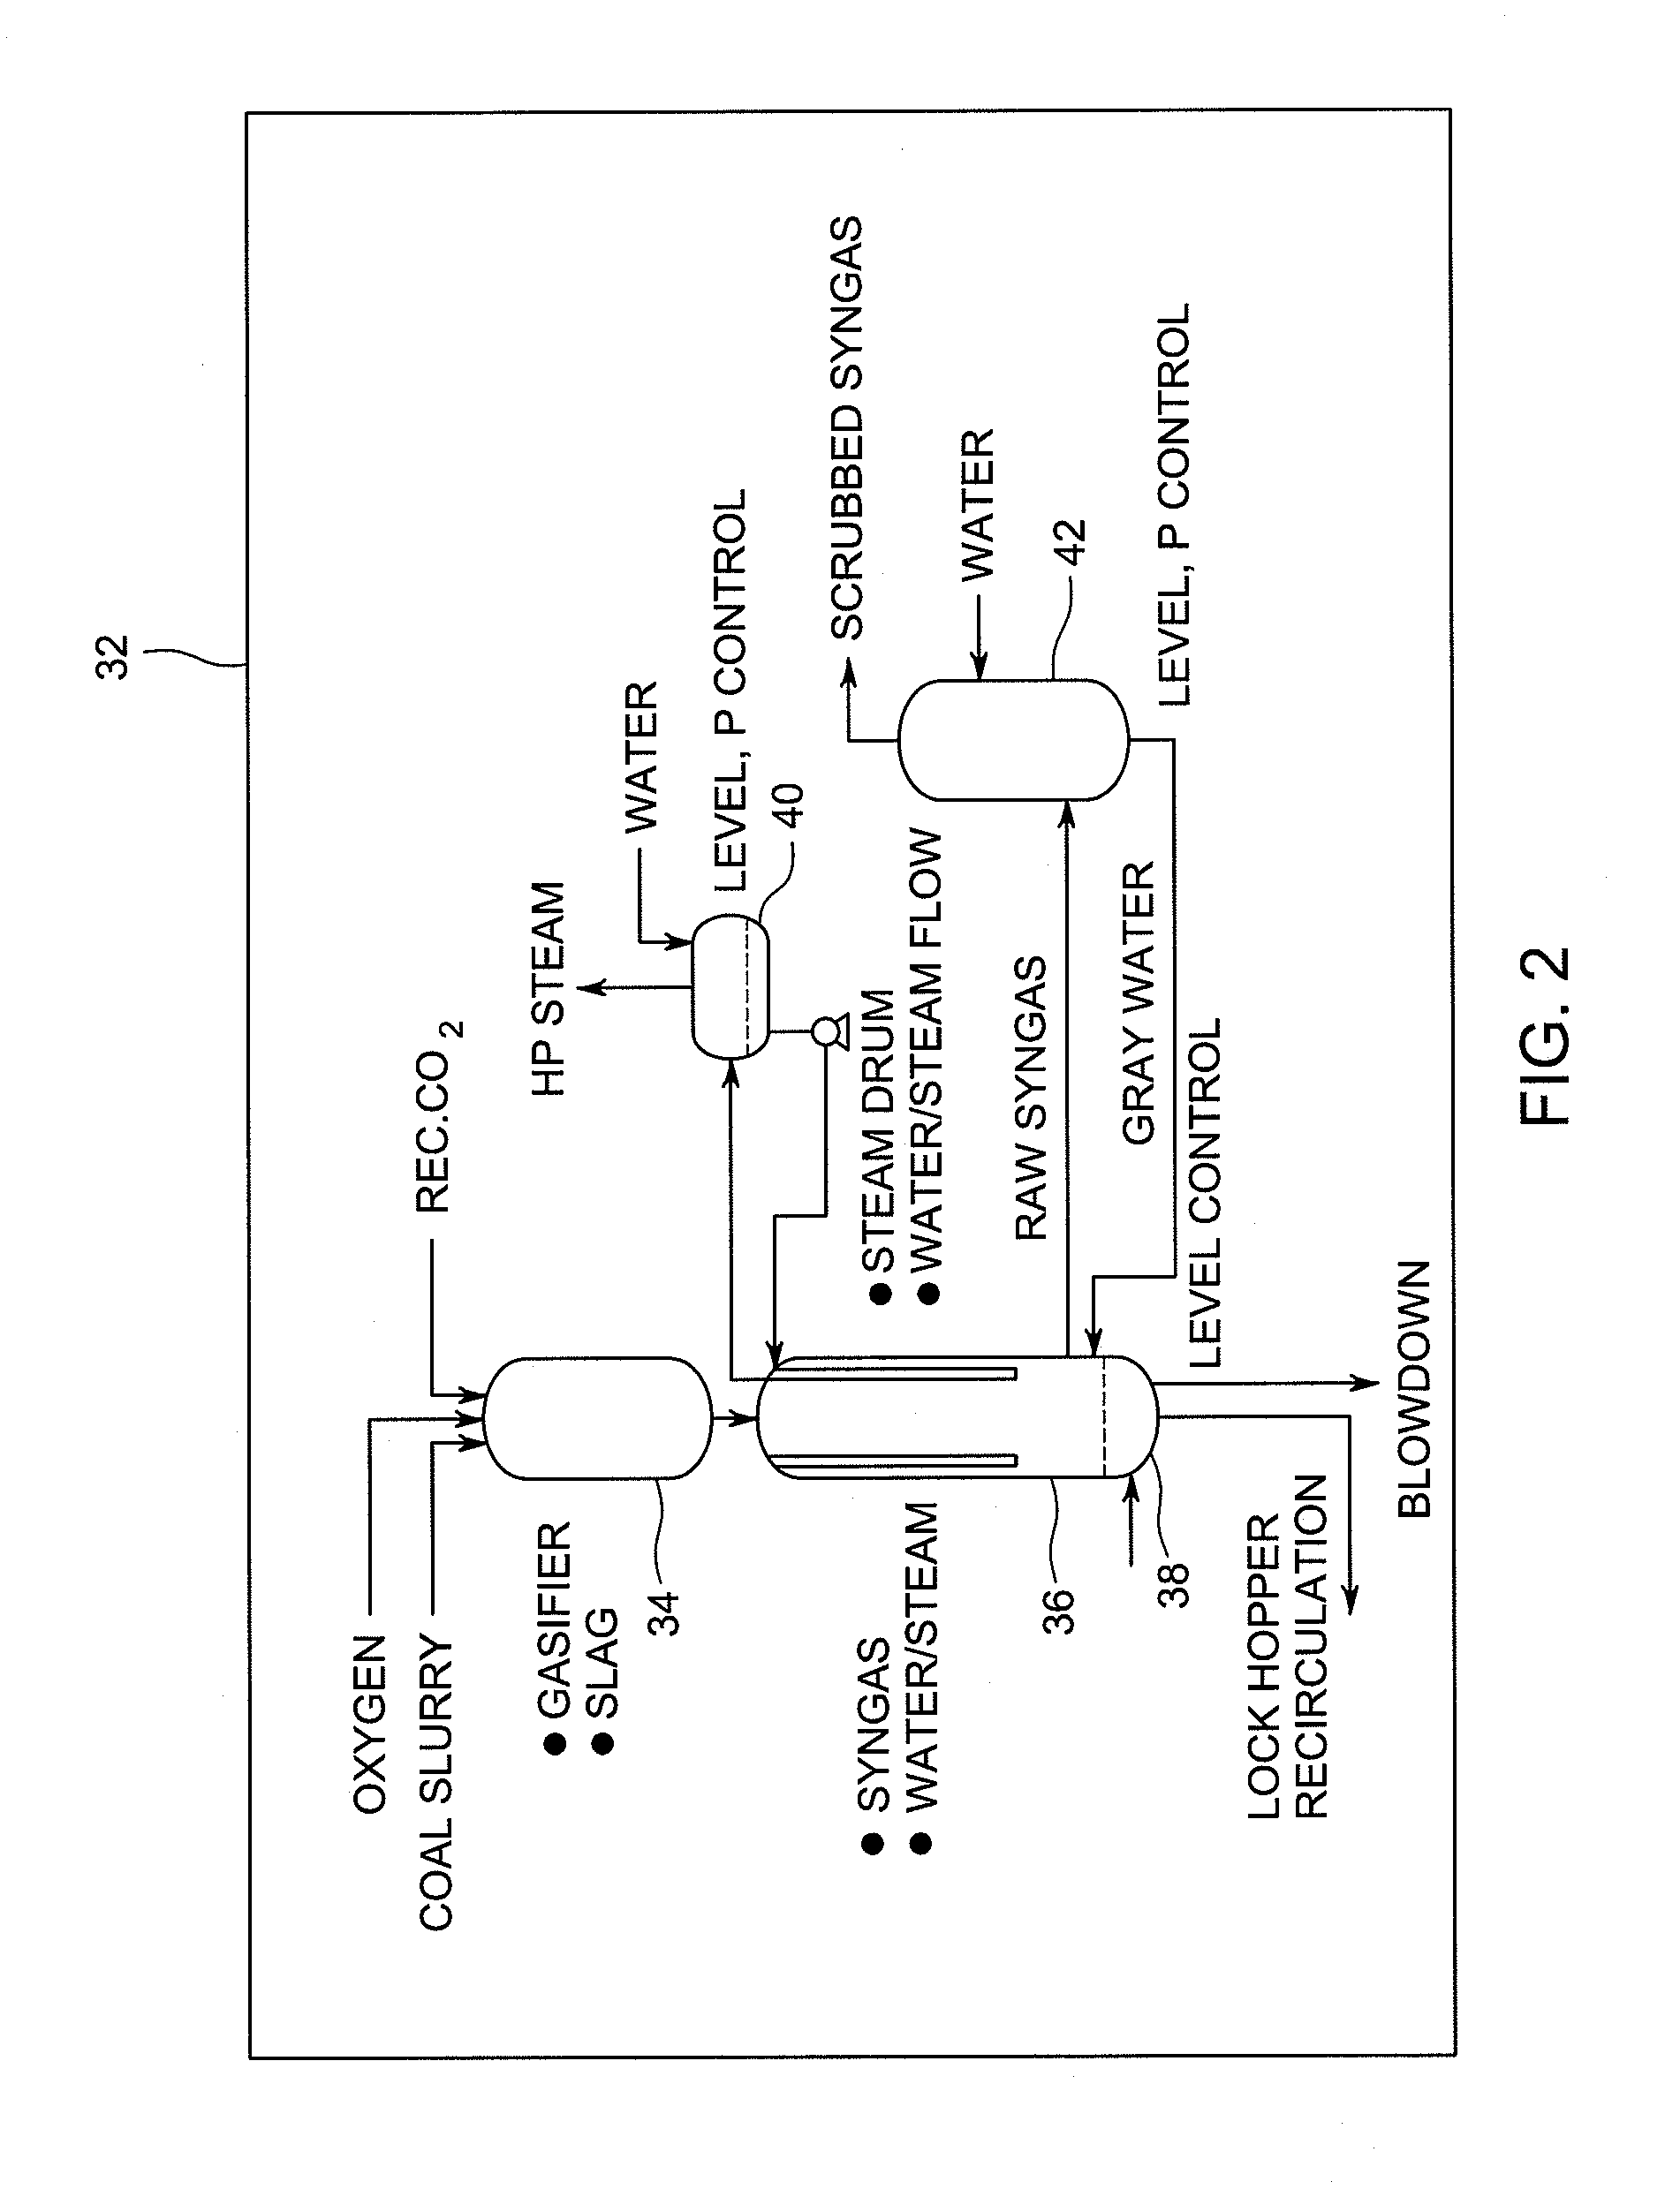 Method and system to estimate variables in an integrated gasification combined cycle (IGCC) plant